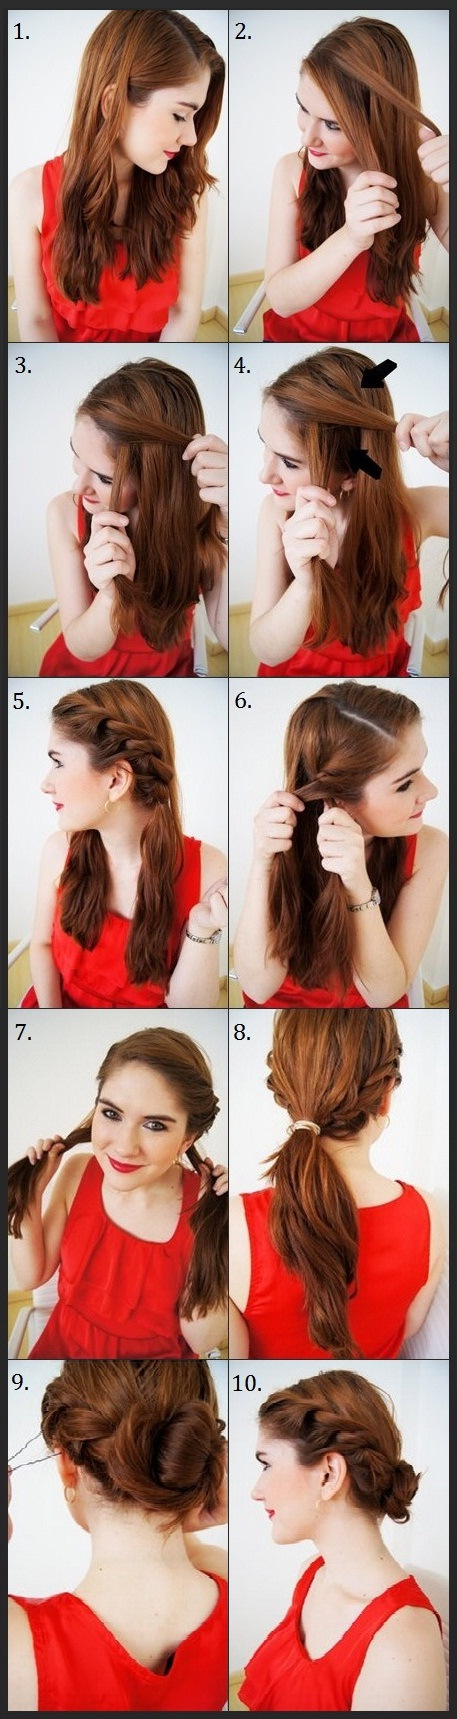 32 Amazing And Easy Hairstyles Tutorials For Hot Summer Days